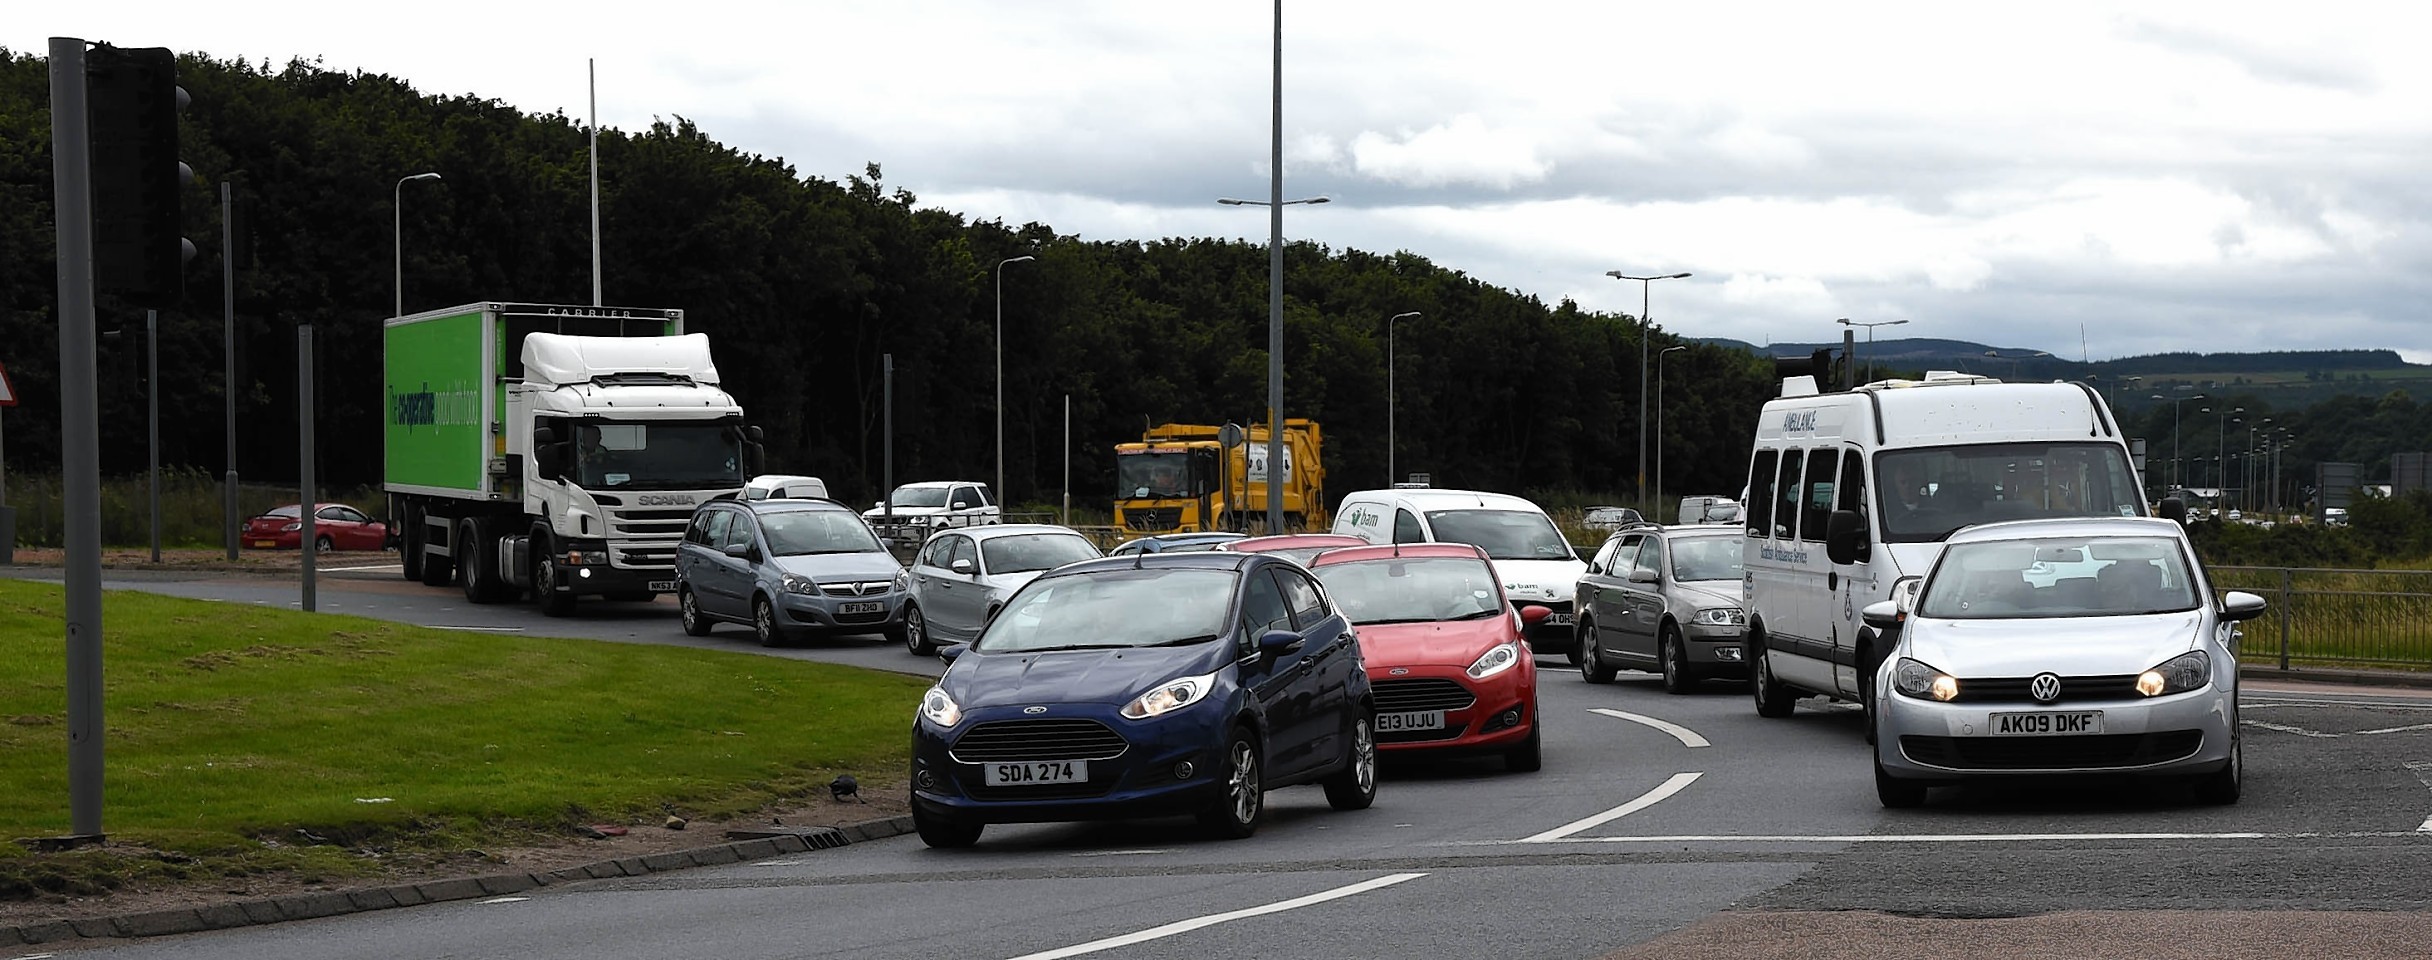 Heavy traffic is expected on Friday at the Kessock Bridge roundabout